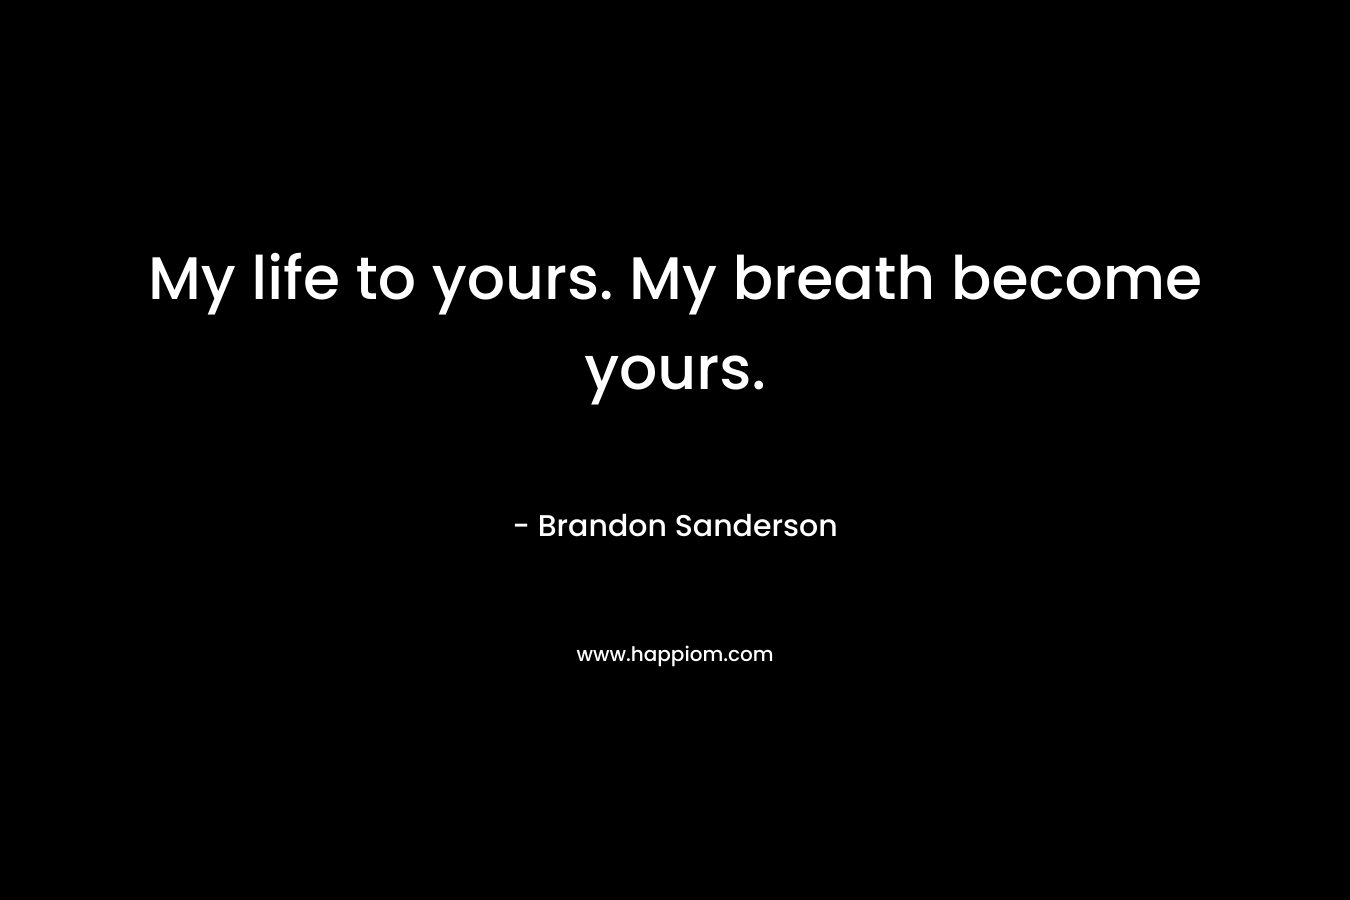 My life to yours. My breath become yours.